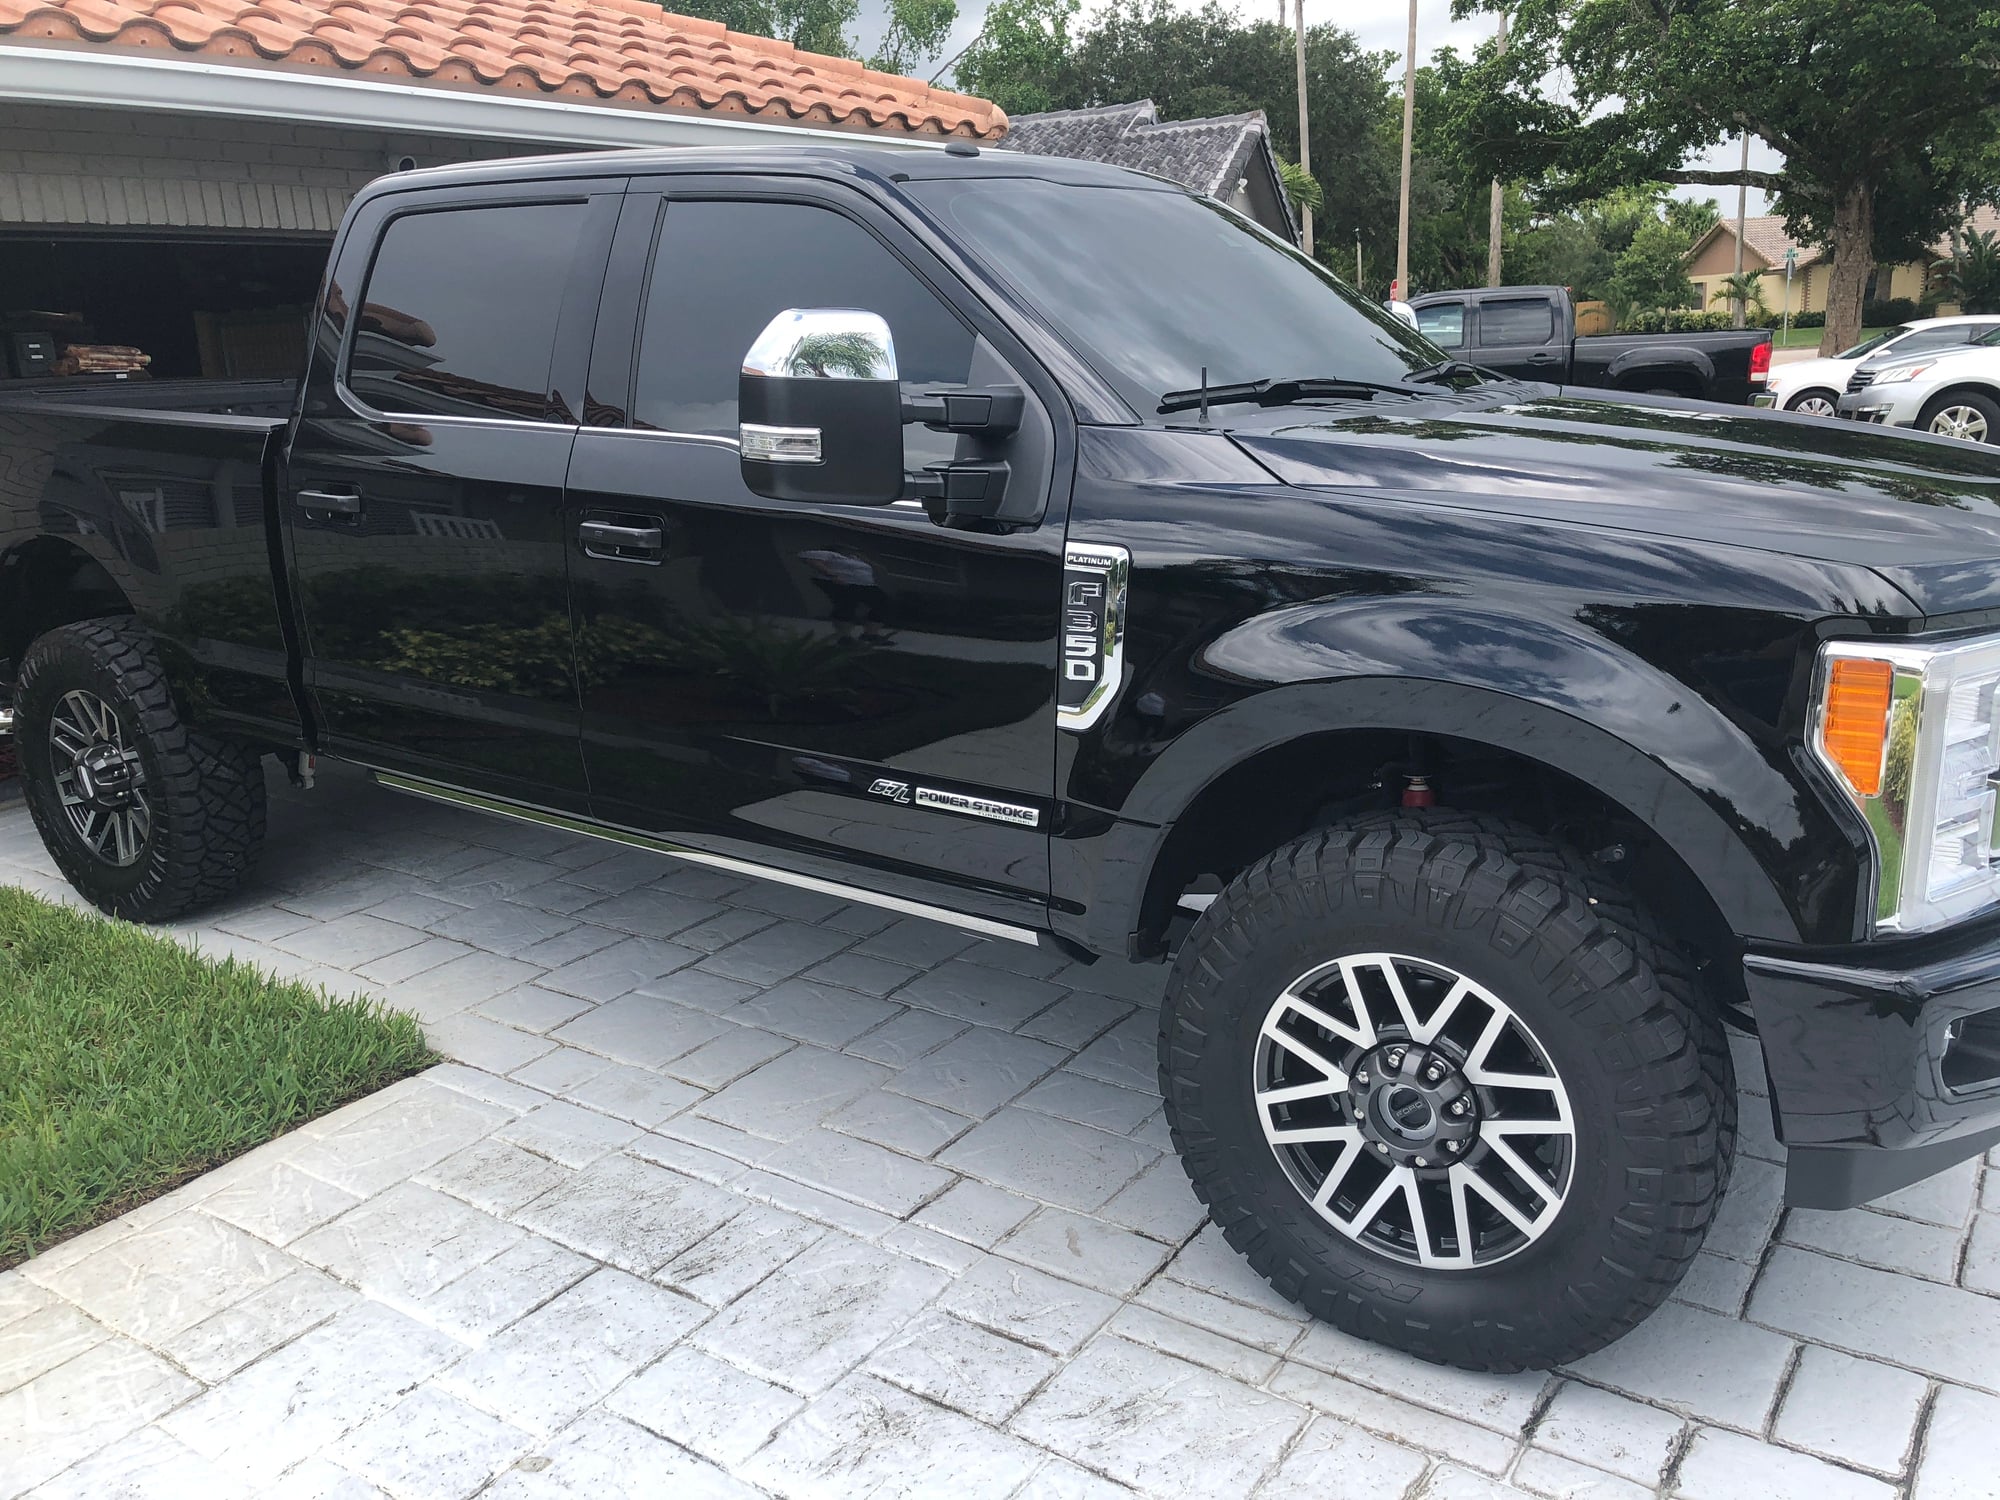 1718 Super Duty Lariat 20s Wrapped In 37 Nitto Ridge Grapplers